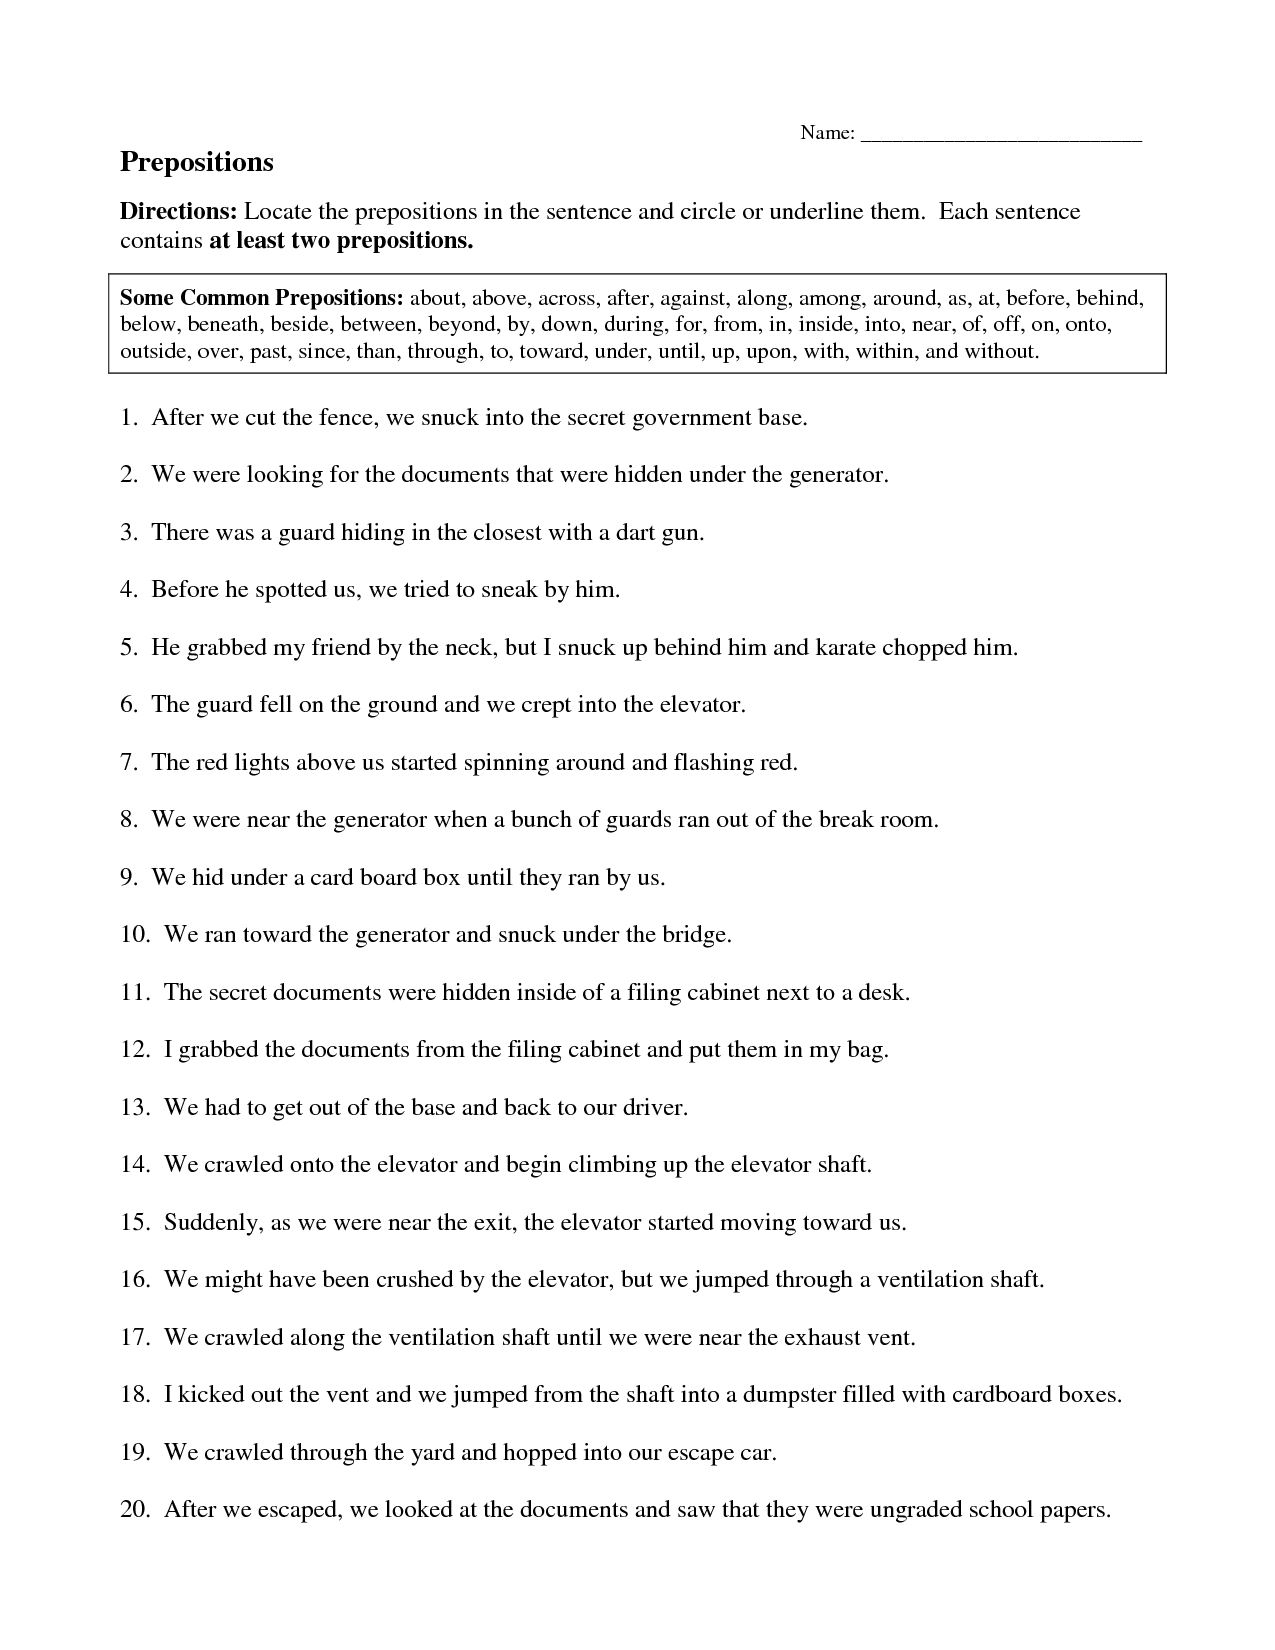 10-best-images-of-6th-grade-prepositional-phrases-worksheet-prepositional-phrases-worksheets